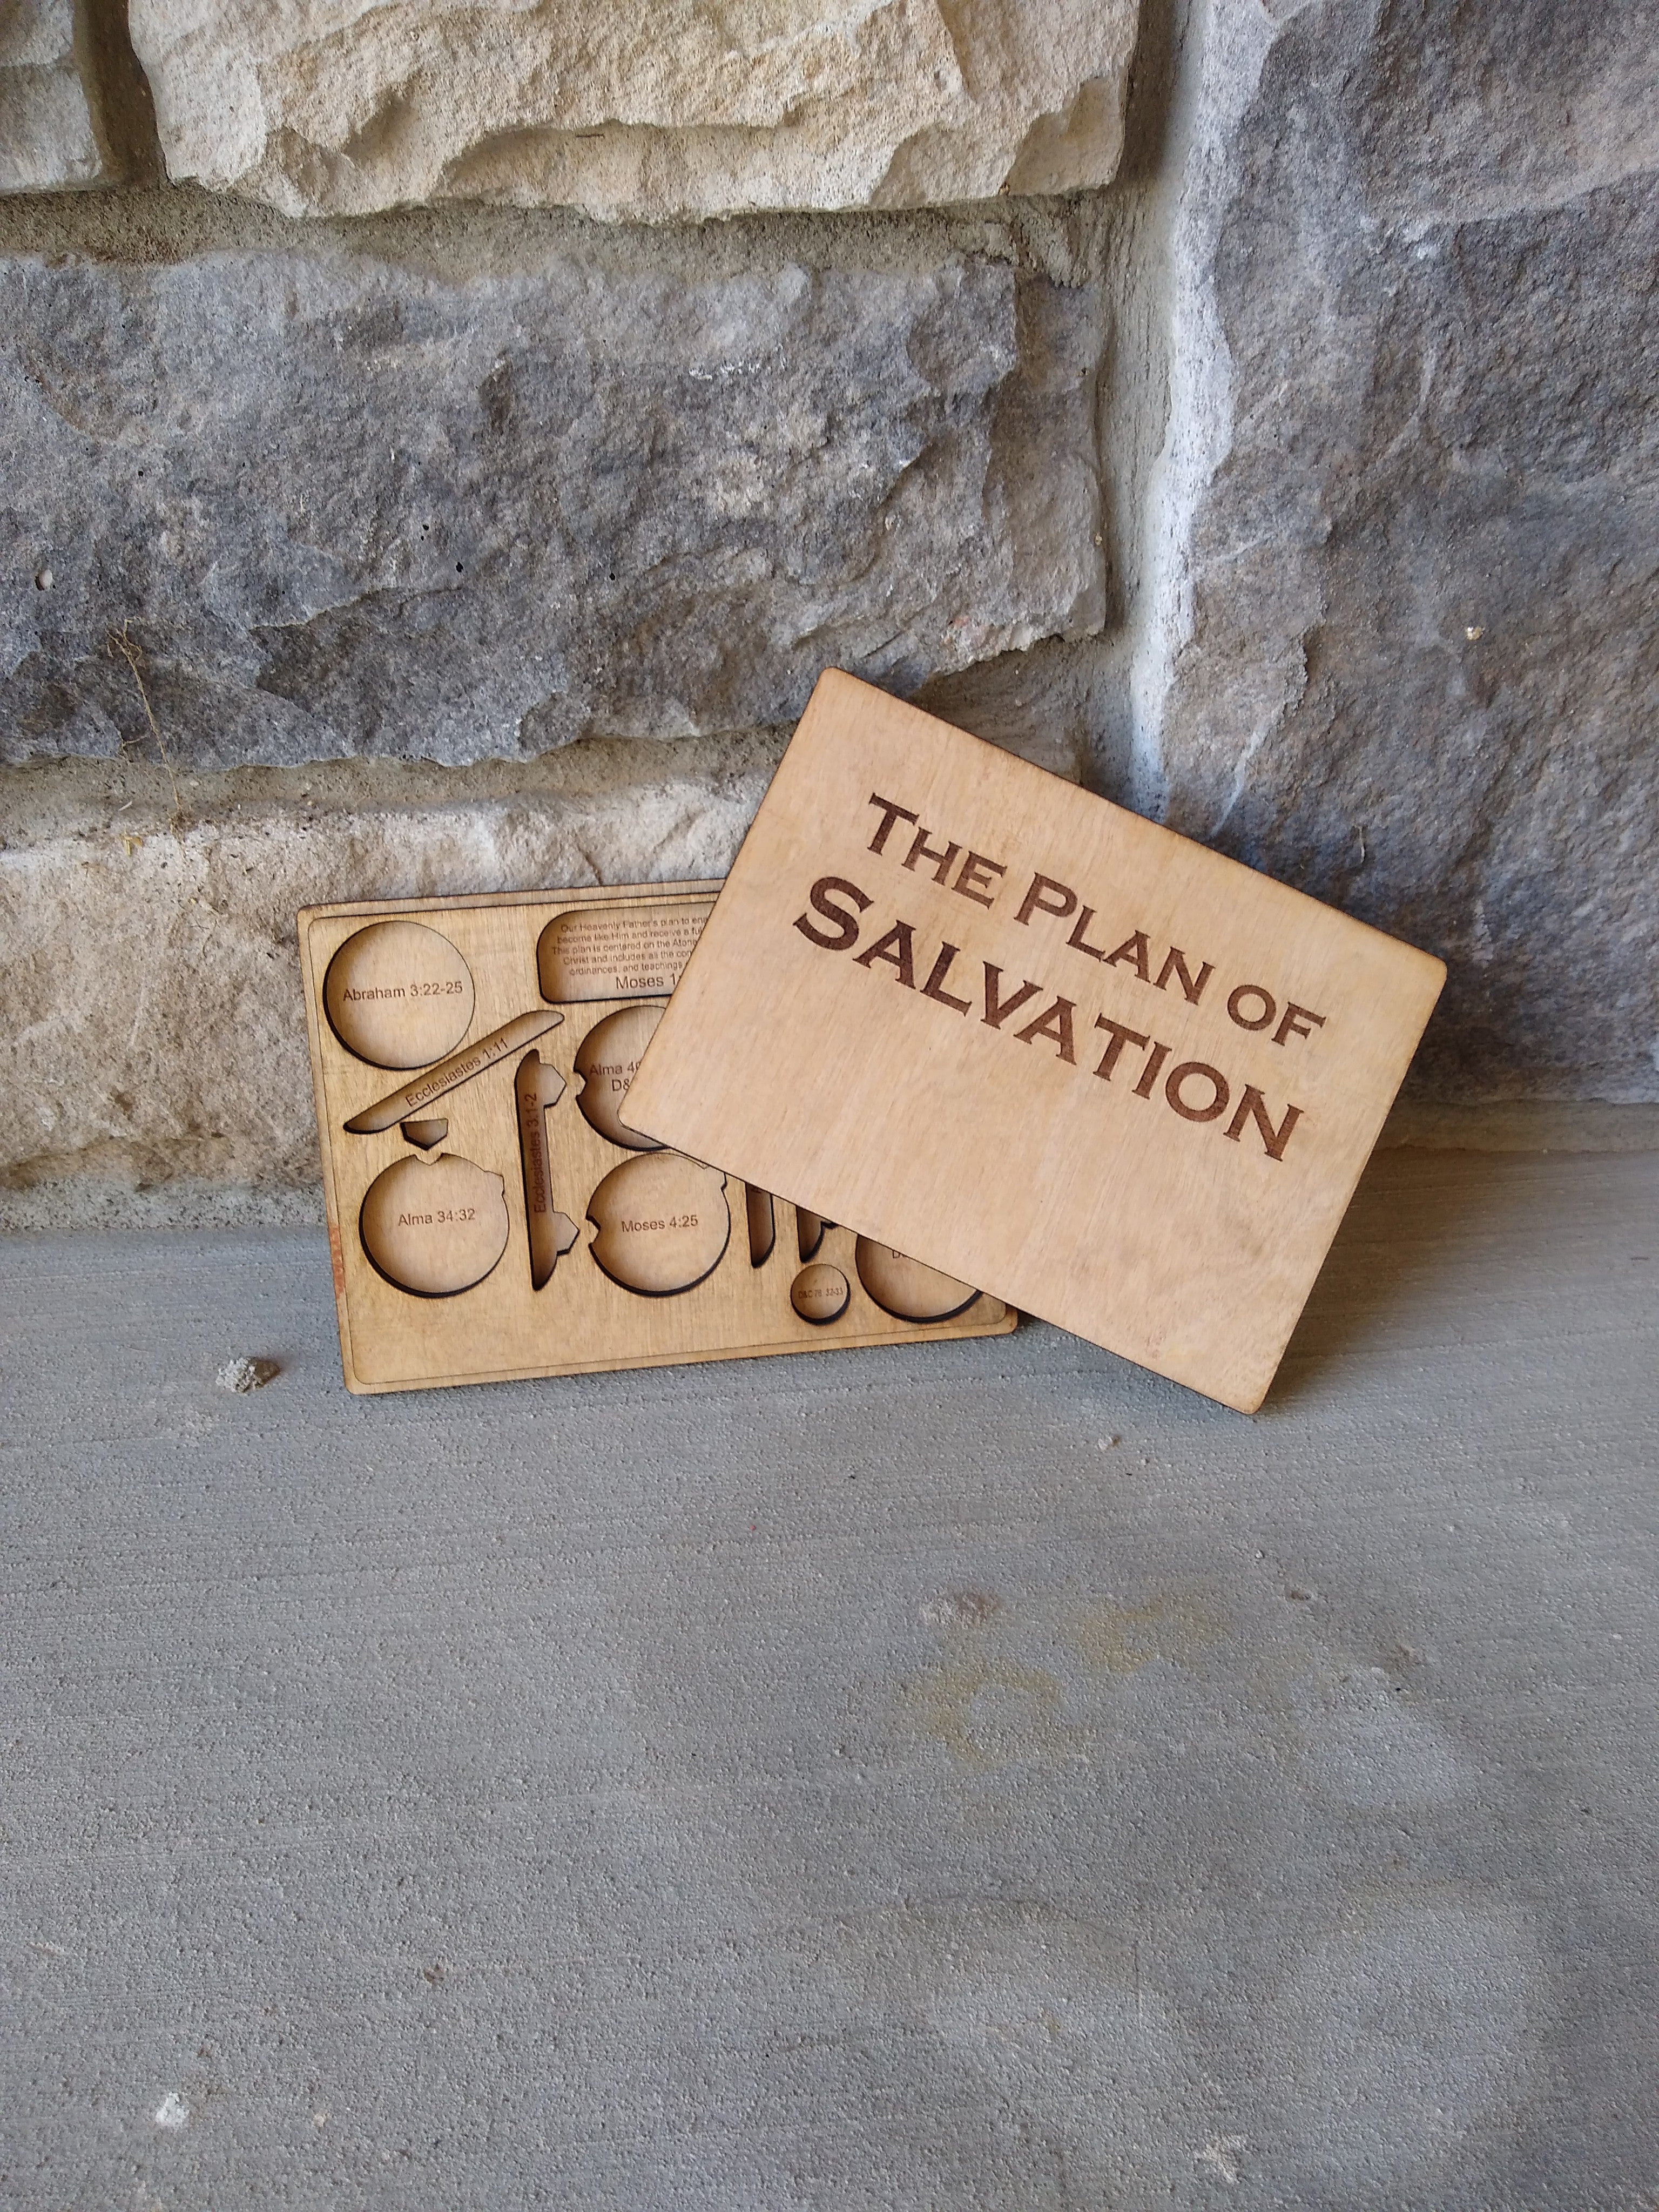 Plan of Salvation Puzzle